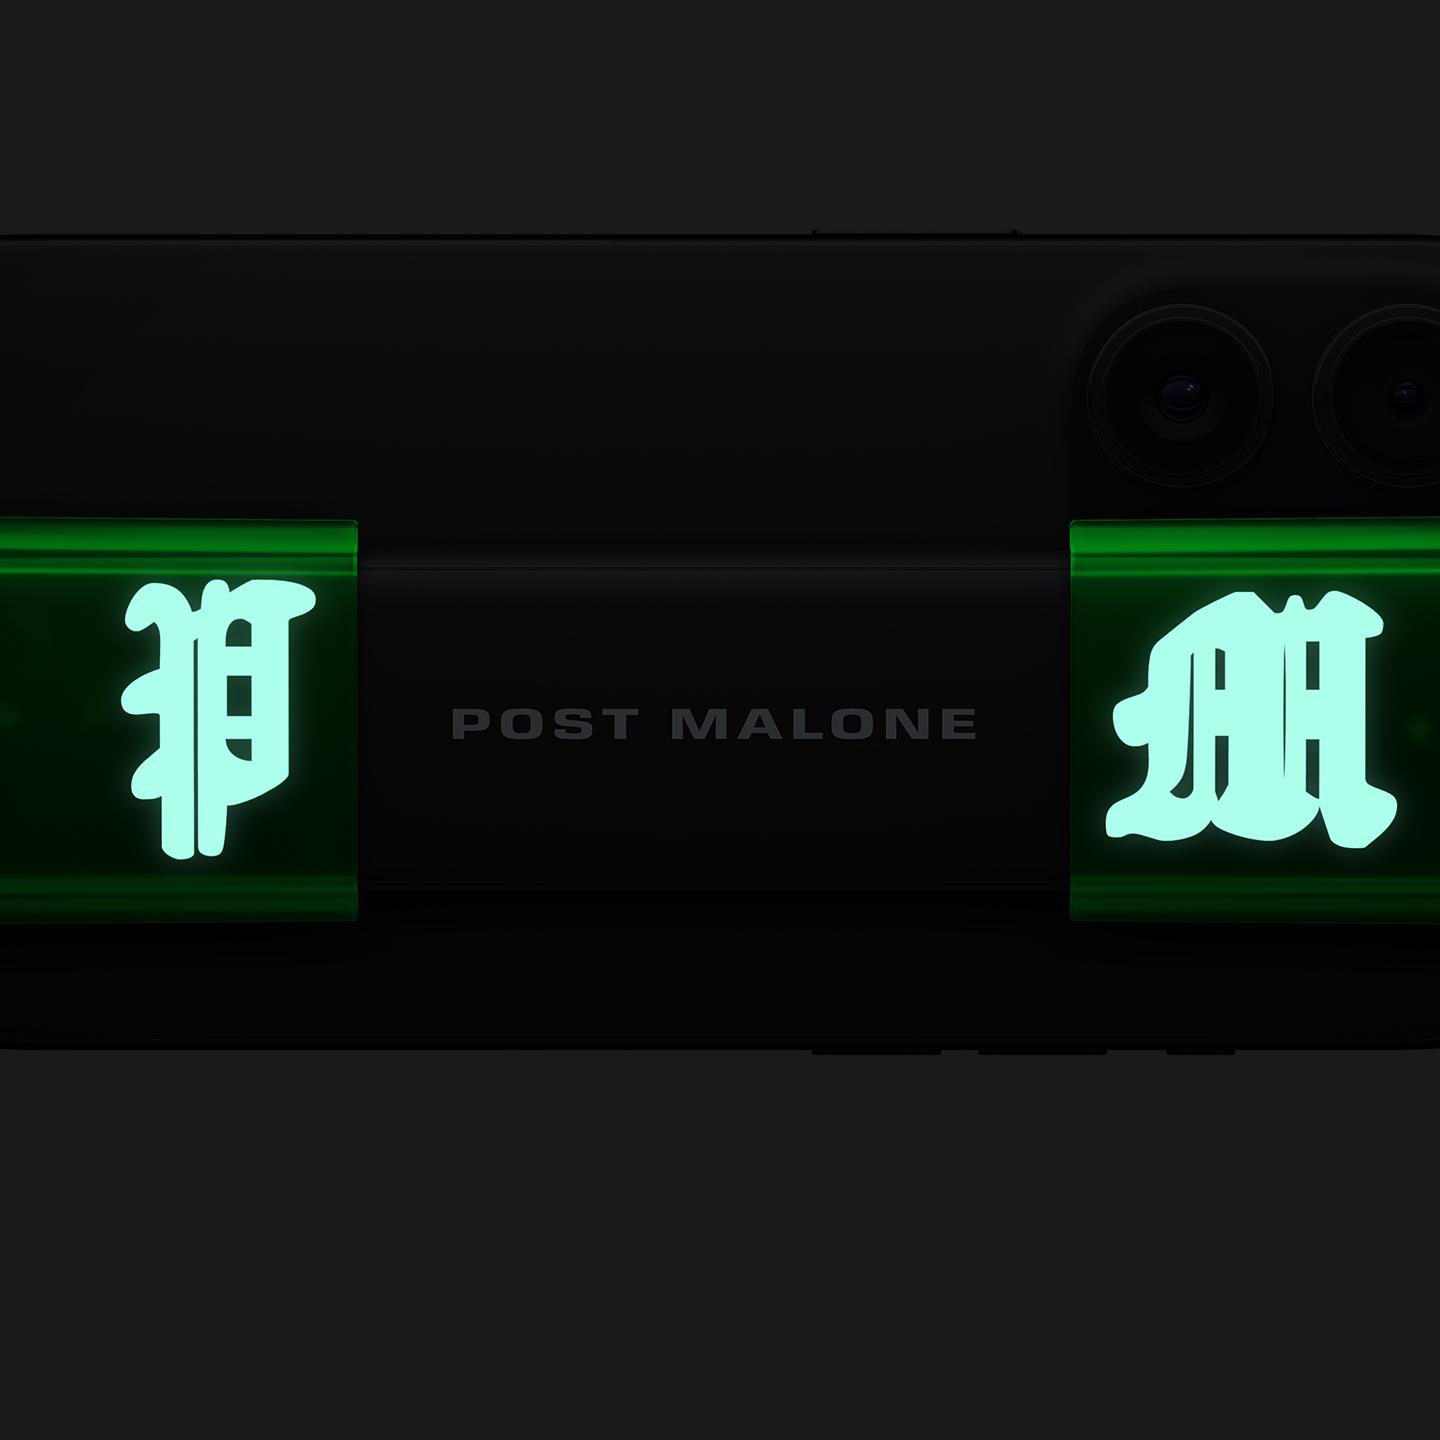 A never before seen Backbone design with a translucent green controller and glow-in-the-dark Post Malone logos on the front and back.